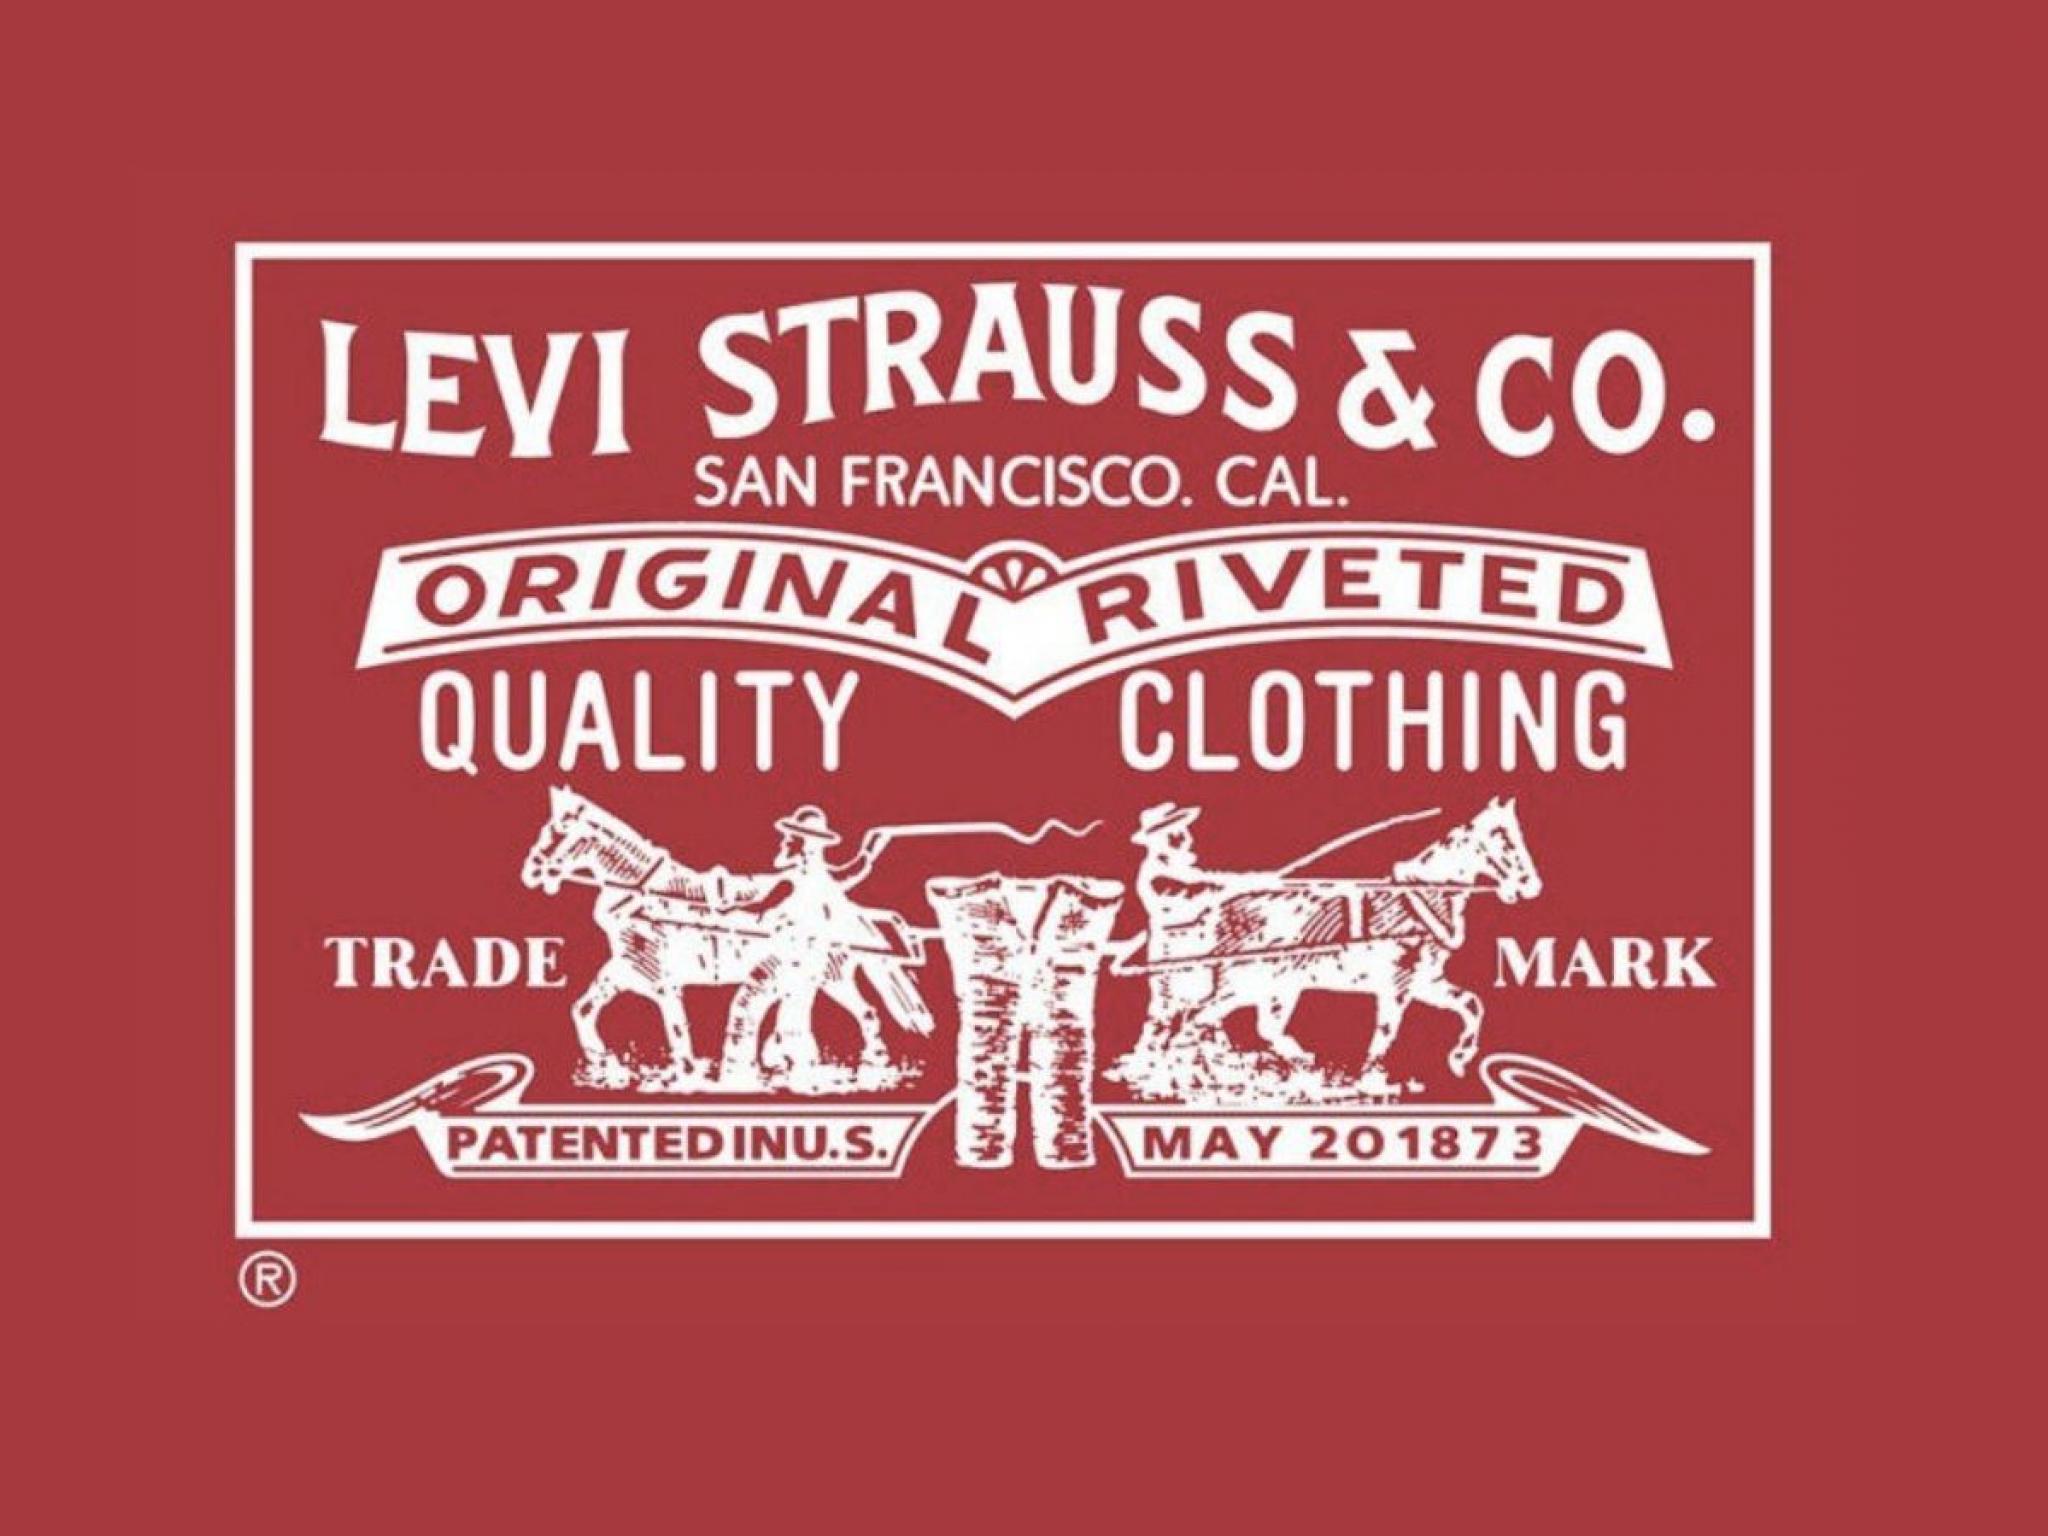  why-levi-strauss-shares-are-trading-lower-by-around-13-here-are-other-stocks-moving-in-thursdays-mid-day-session 